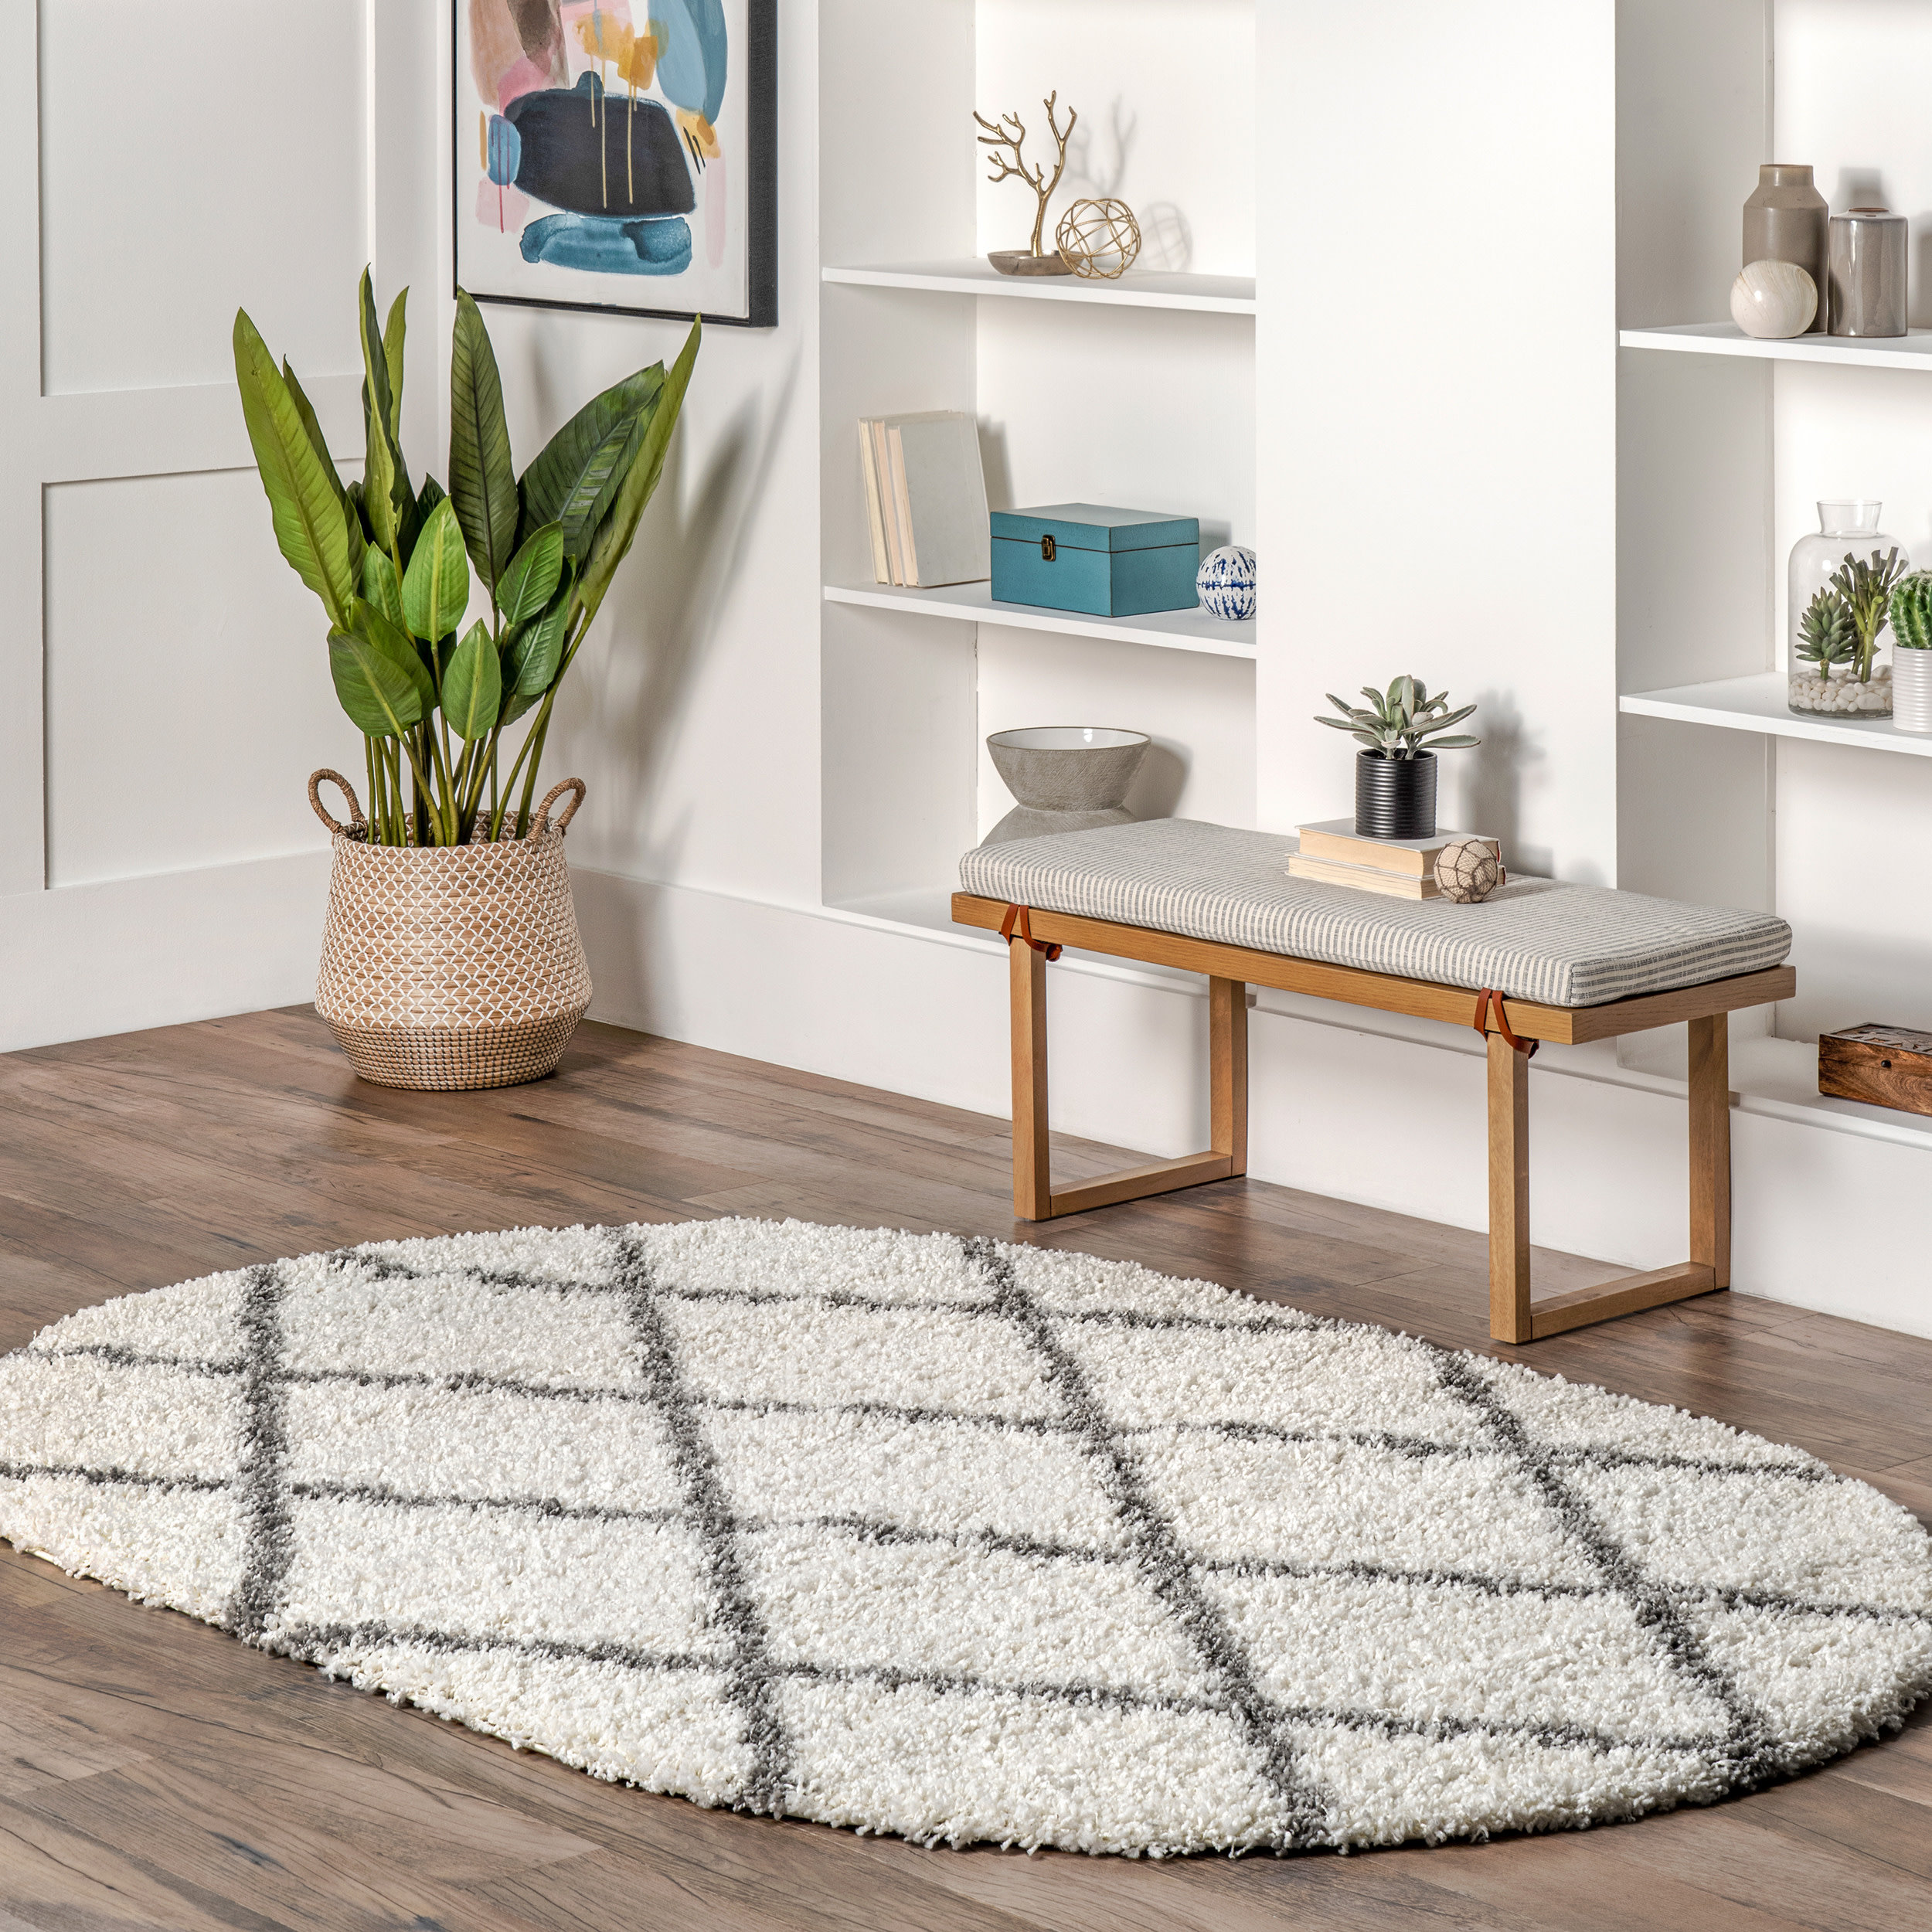 Large Area Rug 11x15 Modern Solid Shaggy Rug Soft Fluffy Indoor Rugs for  Living Room Dorm Kids Room Non-Slip Thick Floor Carpet Faux Fur Floor Cover